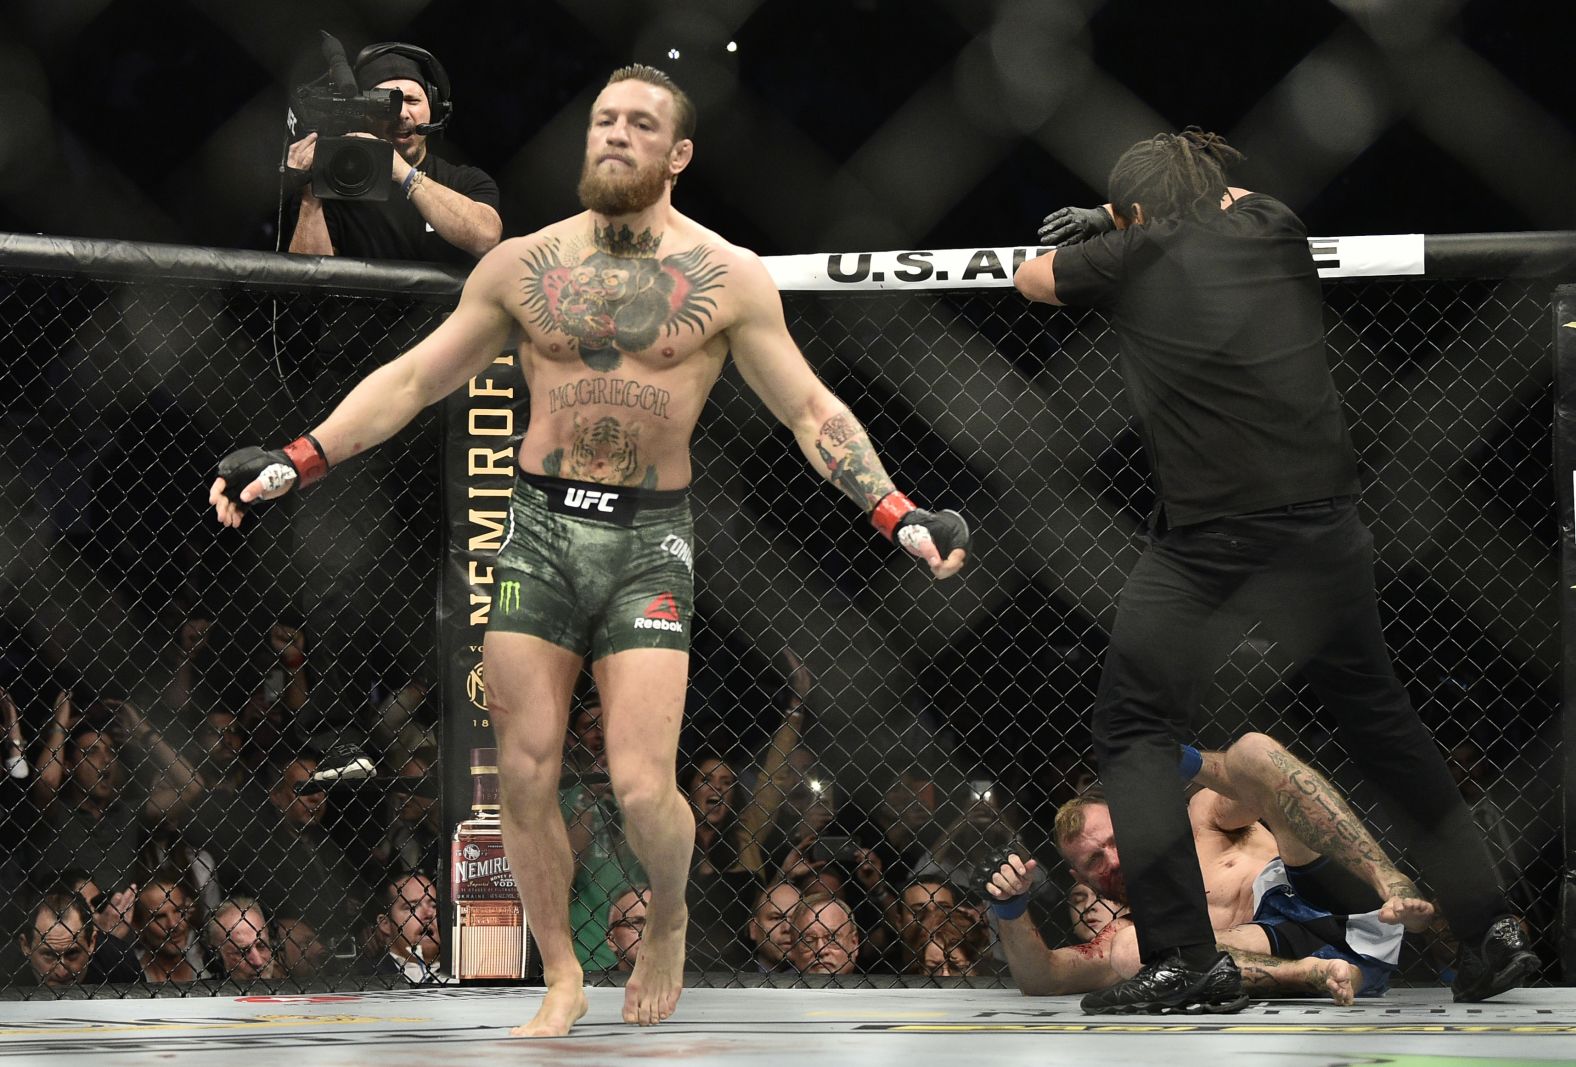 McGregor walks away after knocking out Cerrone in their welterweight fight.